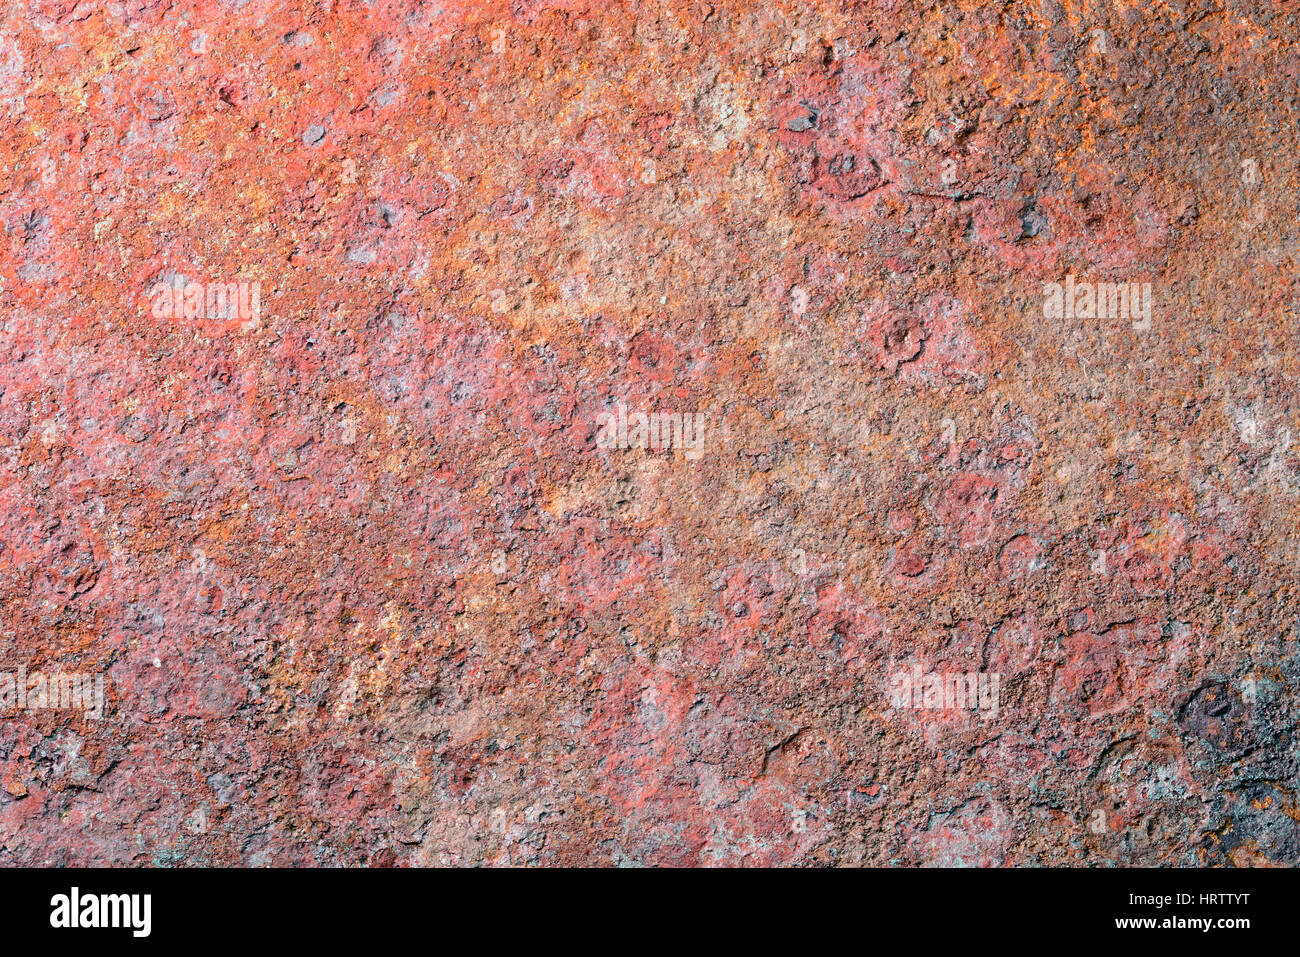 detailed surface of rusty metallic plate Stock Photo